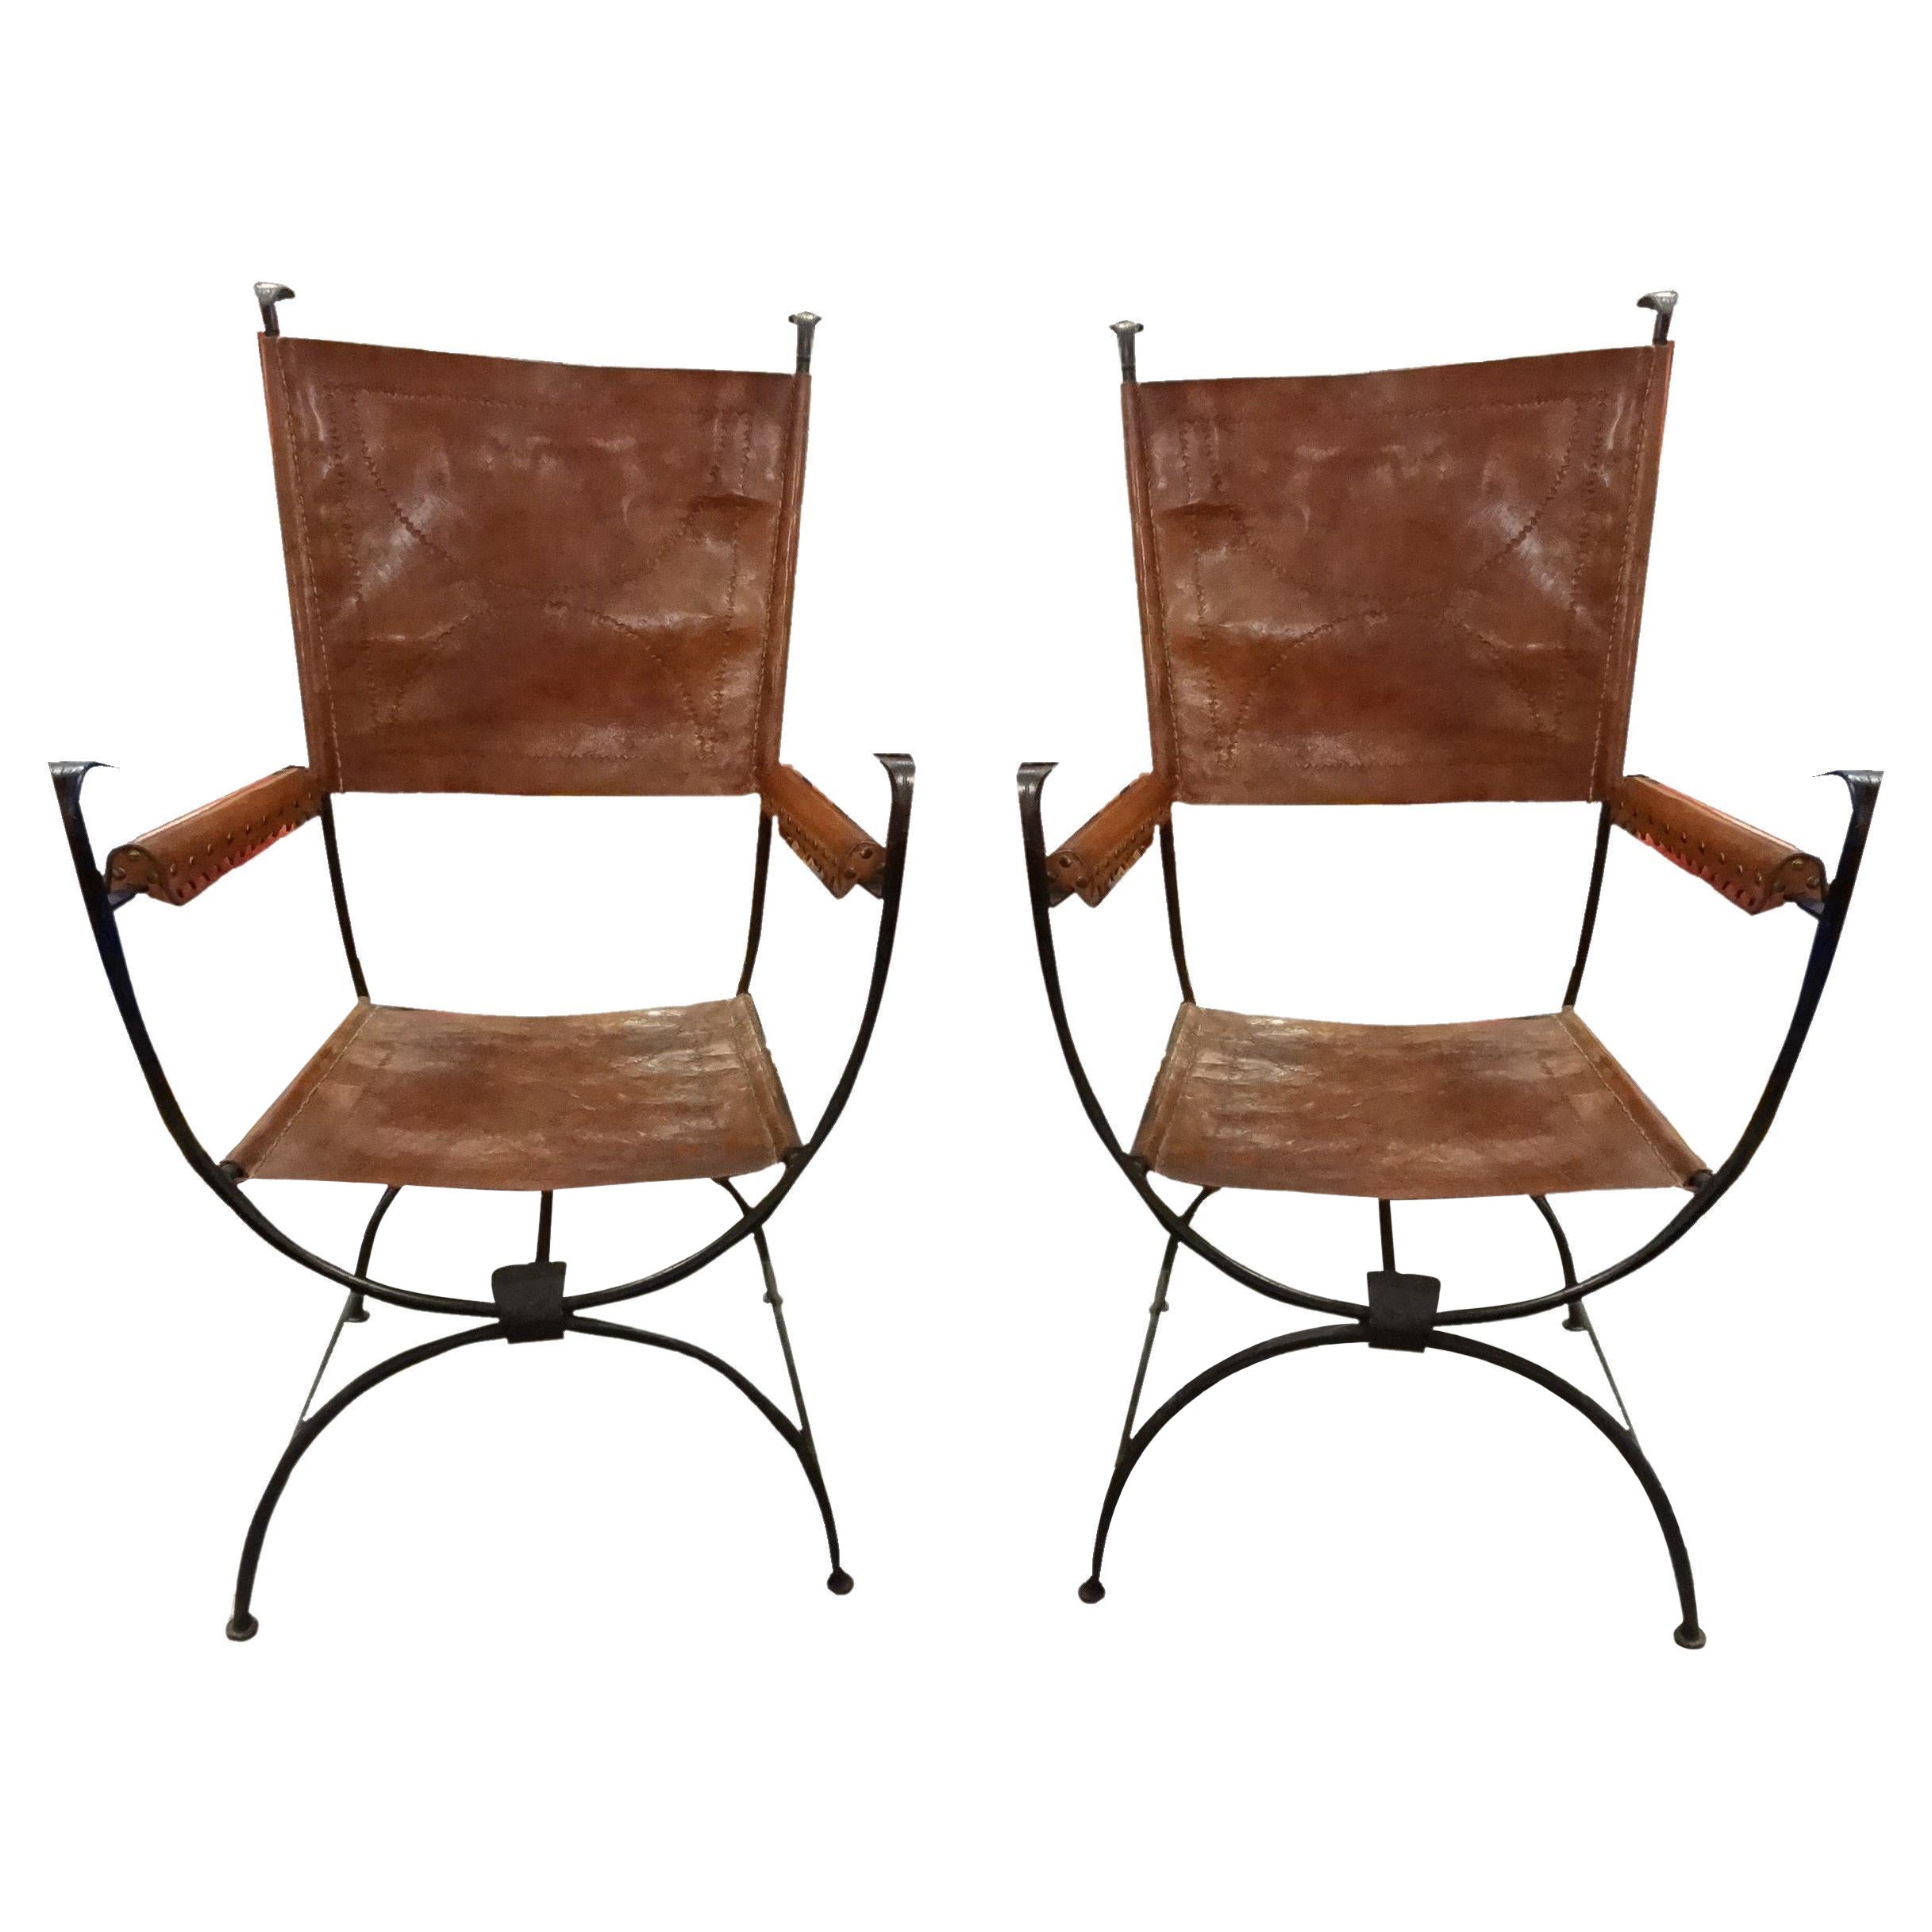 Pair of Armchairs in Leather and iron, 1935